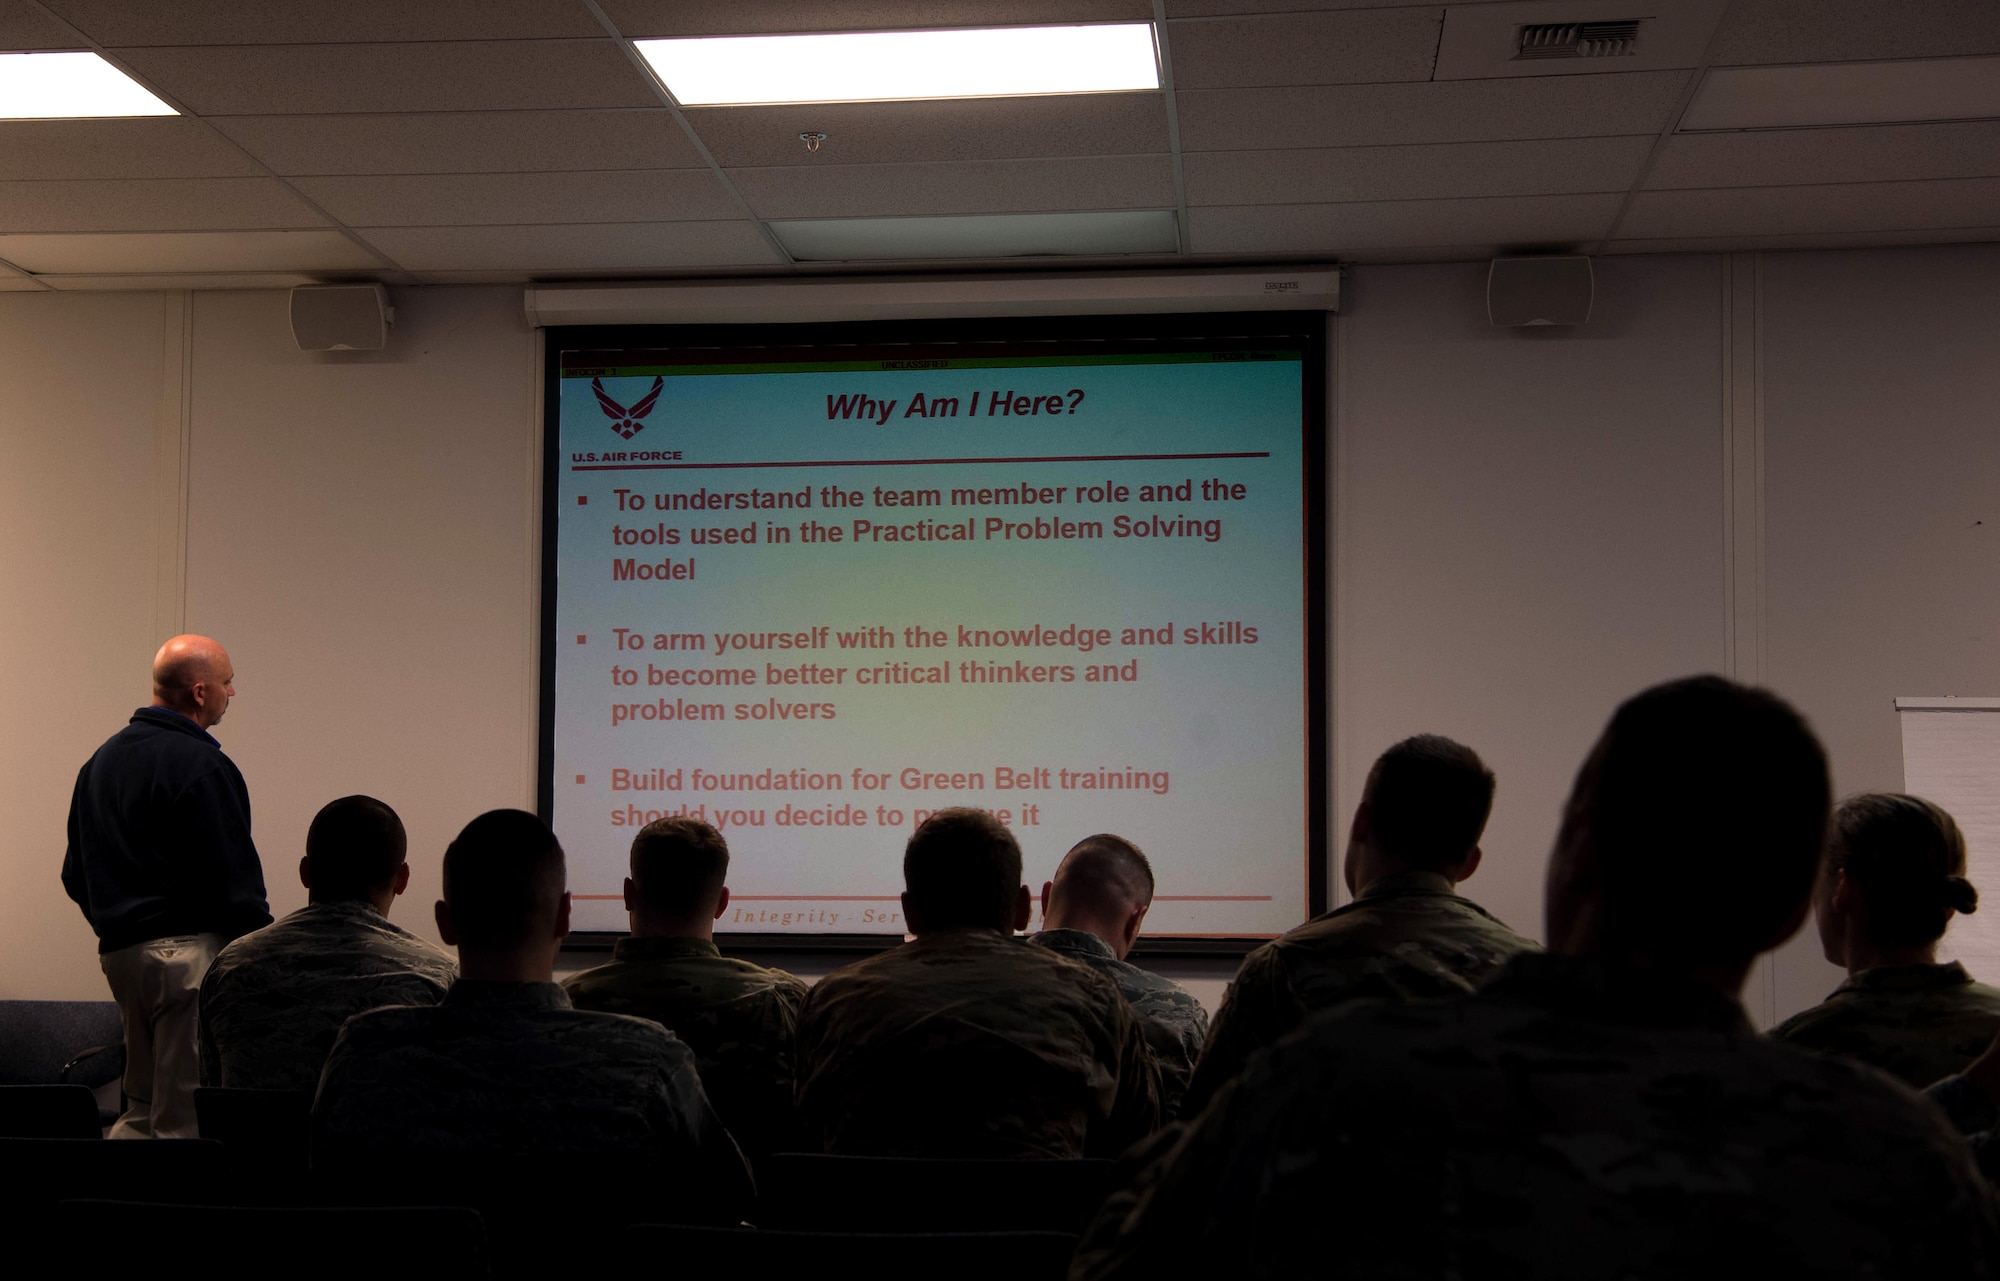 Bryan Dochnahl, 62nd Airlift Wing Manpower wing process manager, teaches the Practical Problem Solving Model class to 627th Logistics Readiness Squadron Airmen at Joint Base Lewis-McChord, Wash., Sept. 20, 2019. The class is a part of the Continuous Improvement Process, a wing program that is designed to reduce waste and improve processes in organizations. (U.S. Air Force photo by Senior Airman Tryphena Mayhugh)